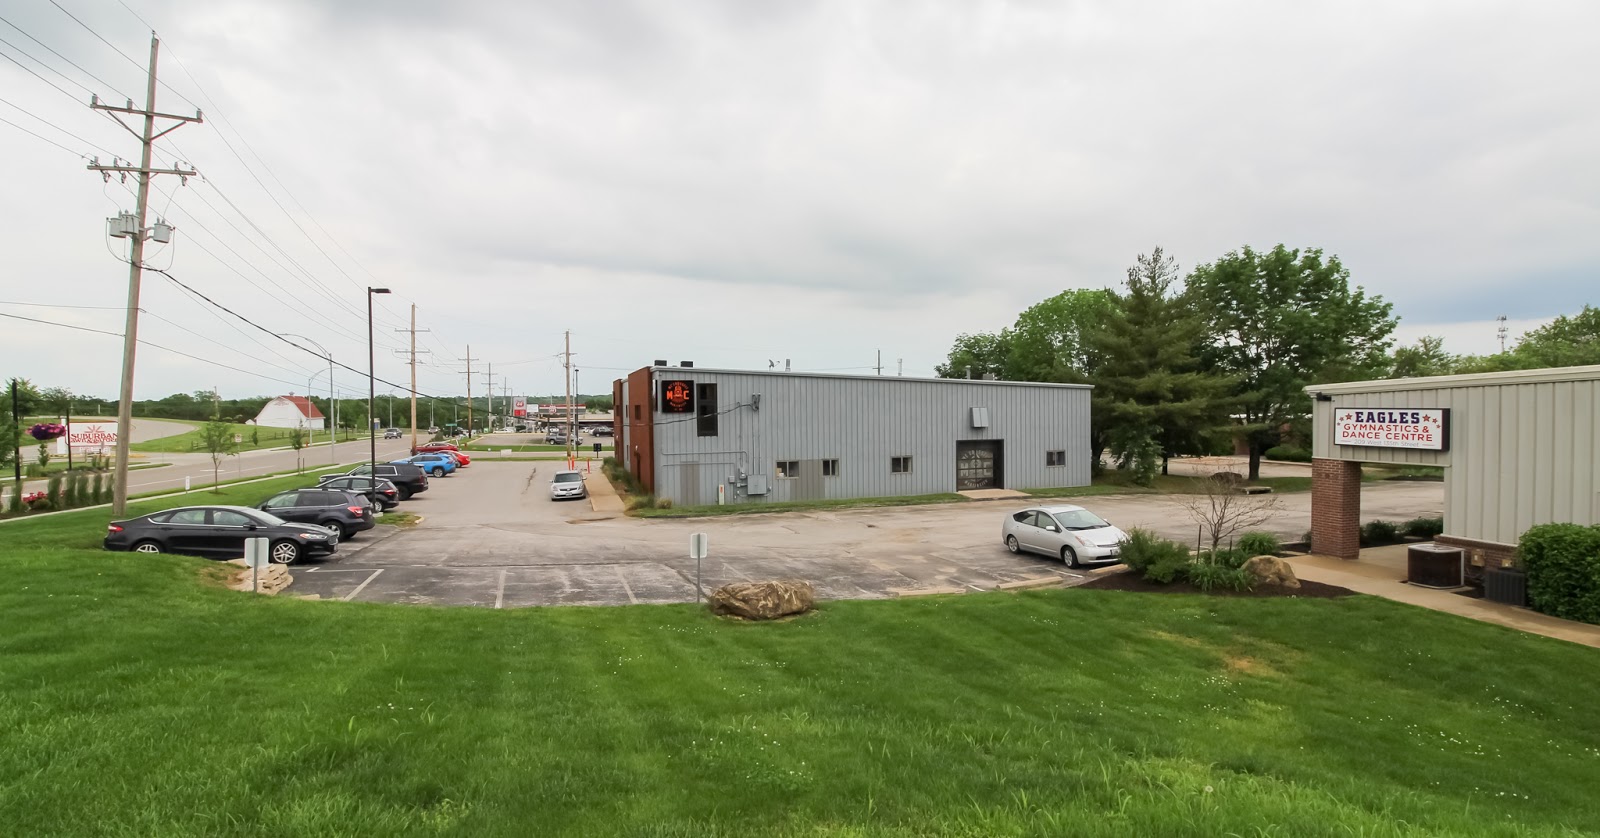 (Left to right, looking east on 135th at Wyandotte) Suburban Lawn & Garden, MC CrossFit, and Eagles Gymnastics & Dance Centre. Schraad & Associates is just beyond the trees.